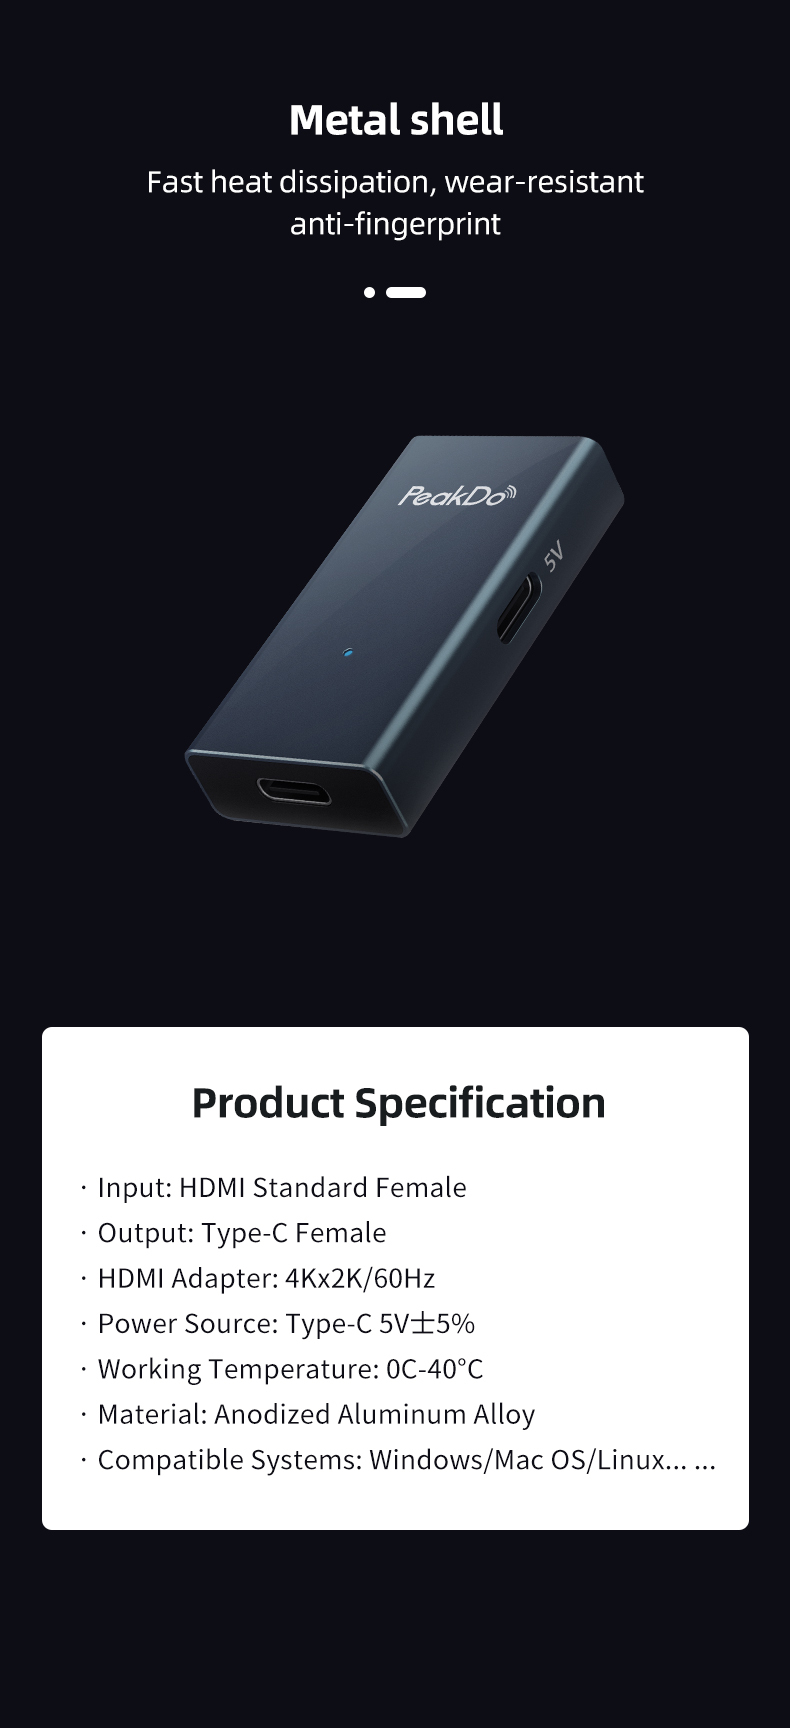 PeakDo 4K HDMI to Type-C Female to Female Adapter  HDMI to usb-C adapter,Nreal Air adapter,Xreal Air adapter,Rokid adapter,HDMI to Type-C adapter,HDMI to C,HDMI to C 4k